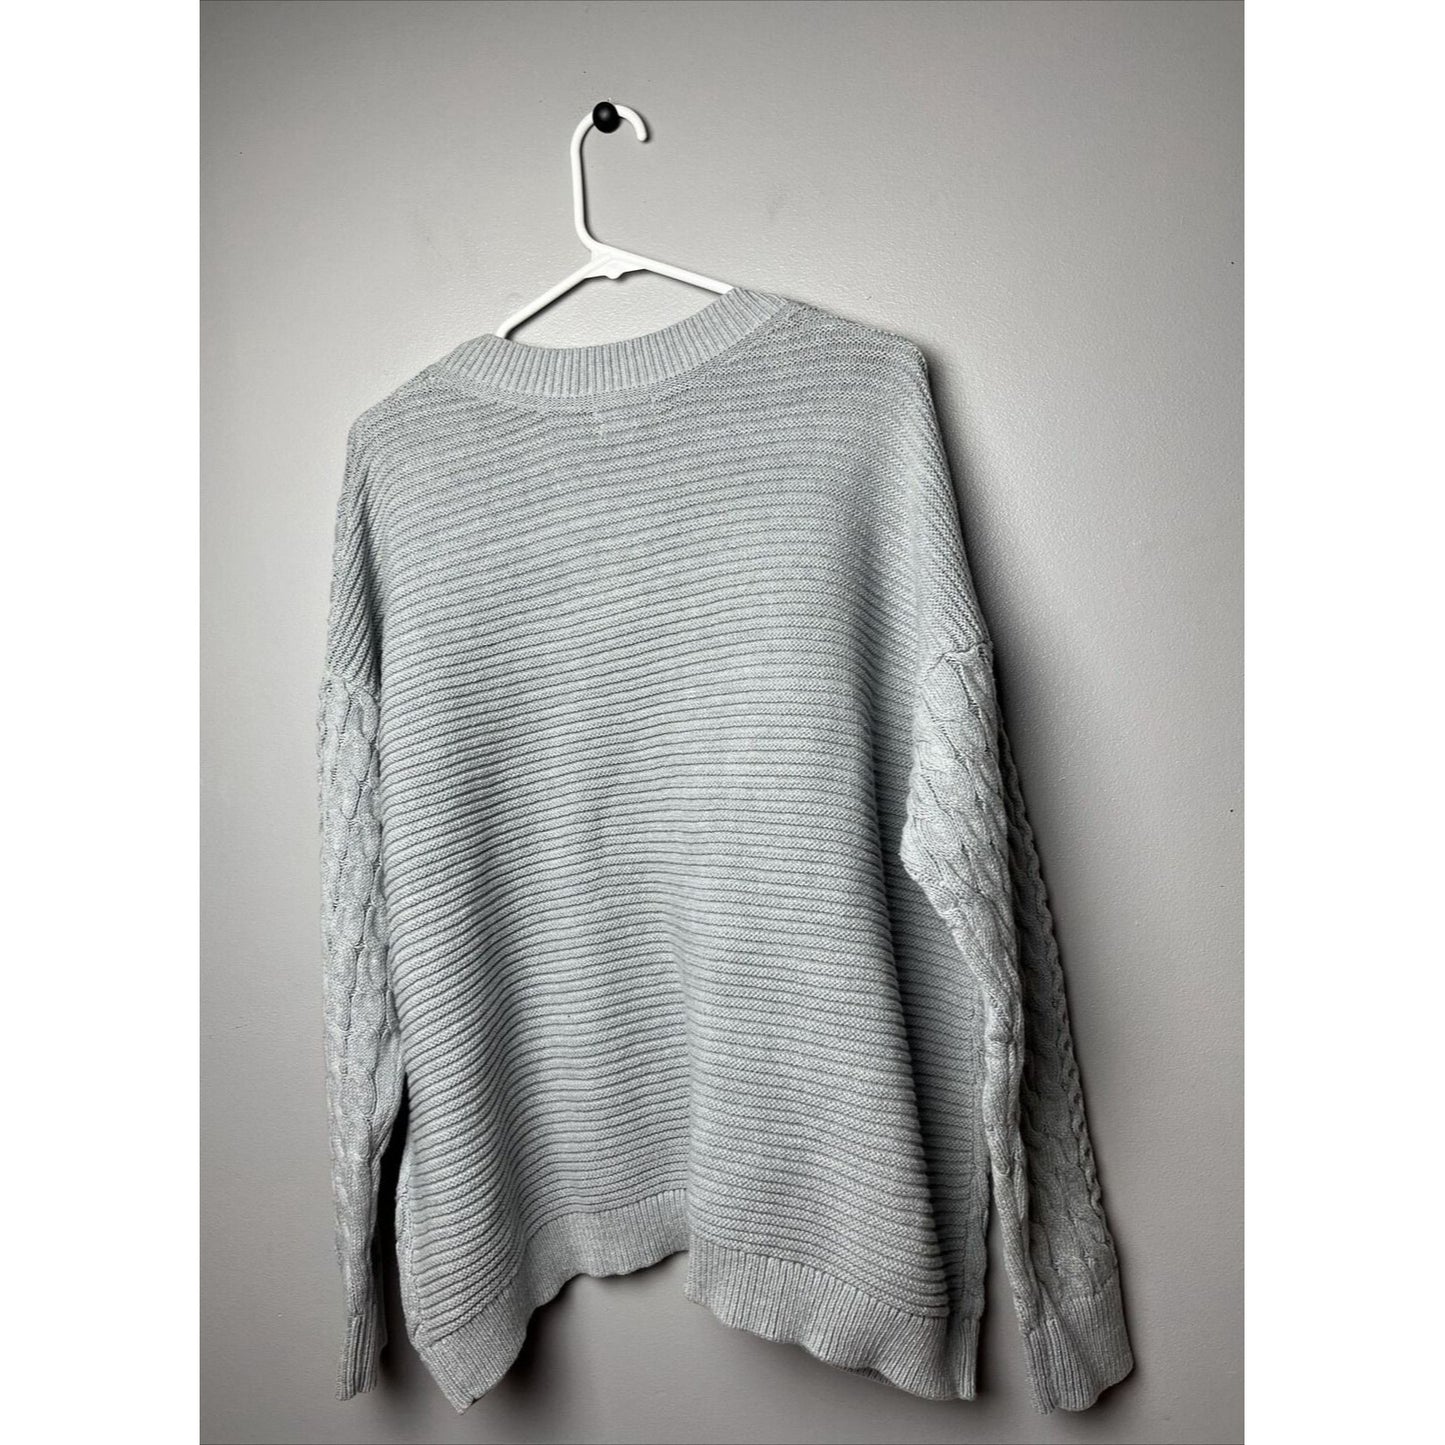 Caslon Cable V-Neck Pointelle Sweater Size XL Grey NWT